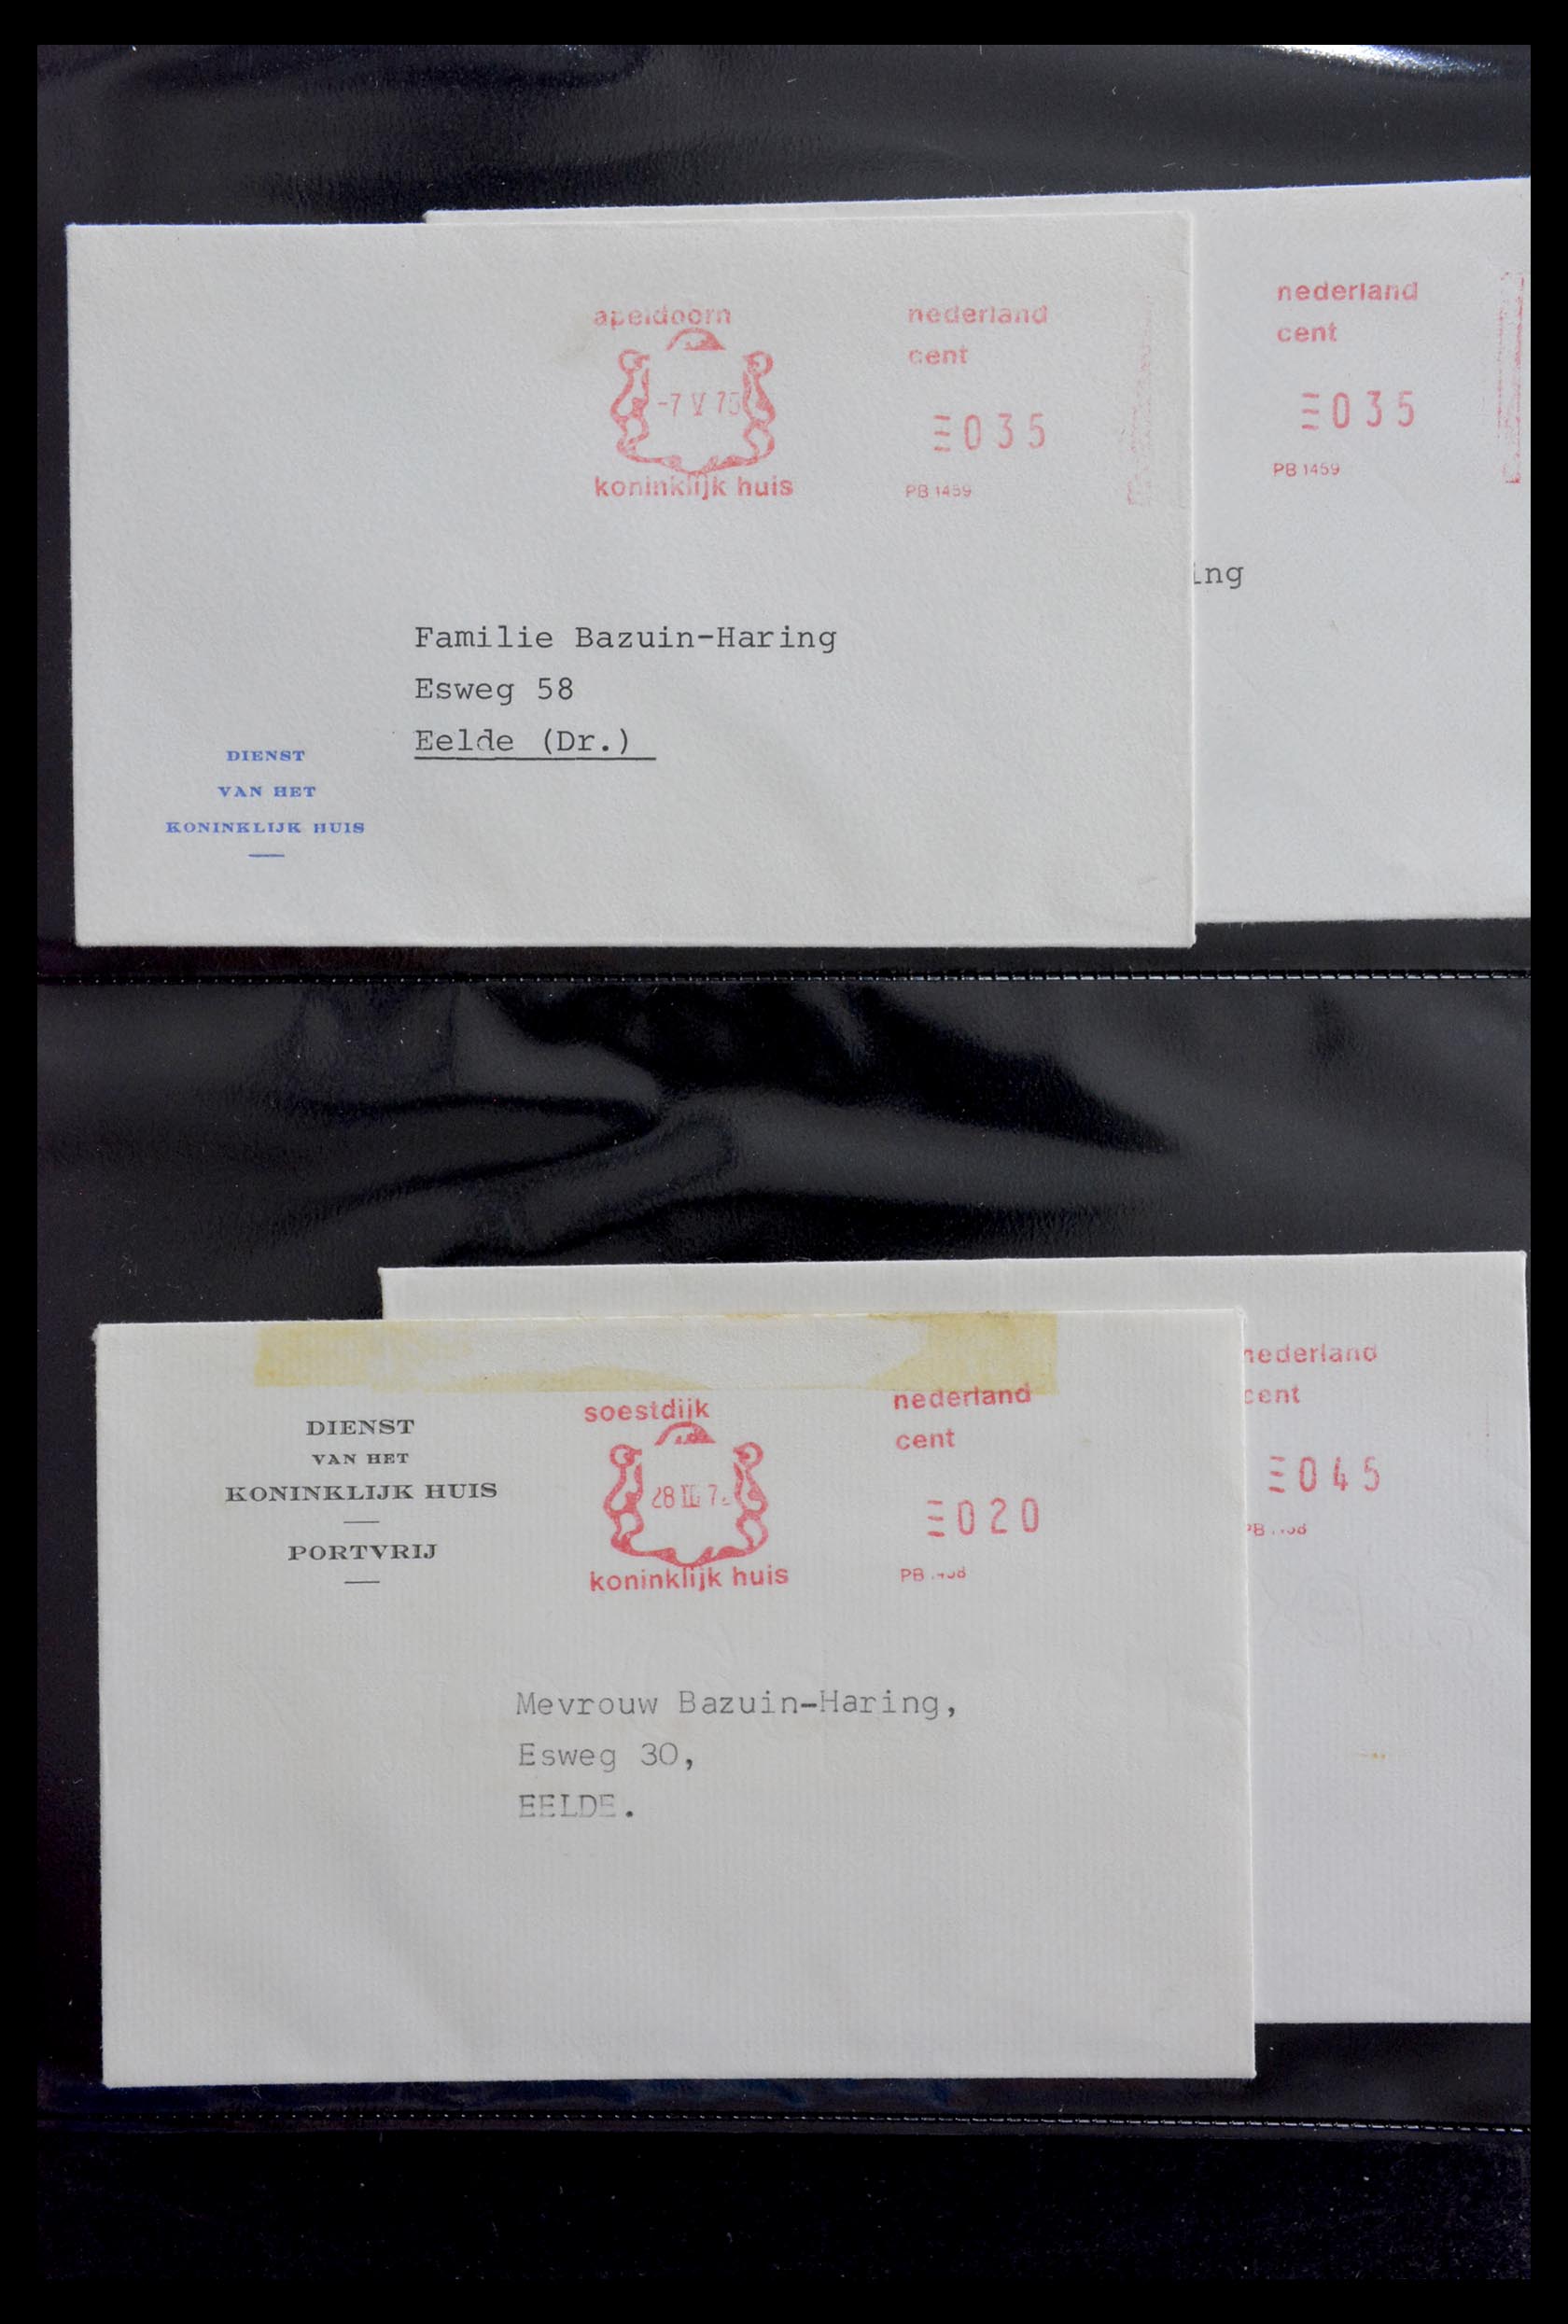 29241 007 - 29241 Netherlands covers royals.